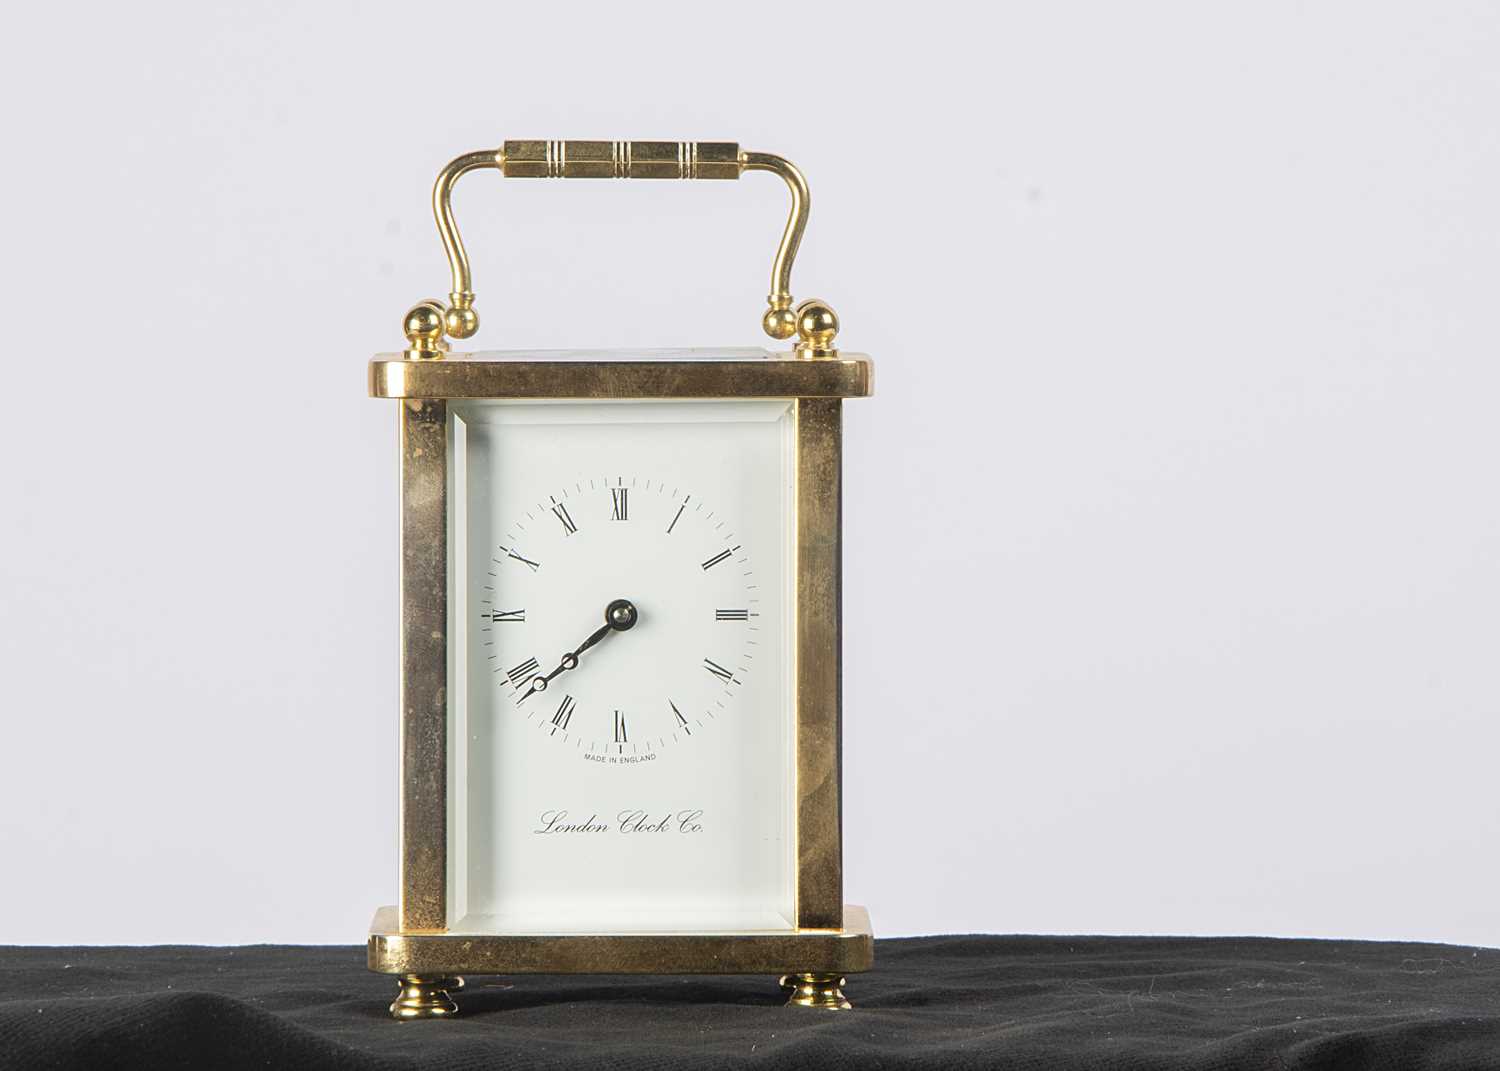 Lot 3 - A modern brass carriage timepiece from the London Clock Co